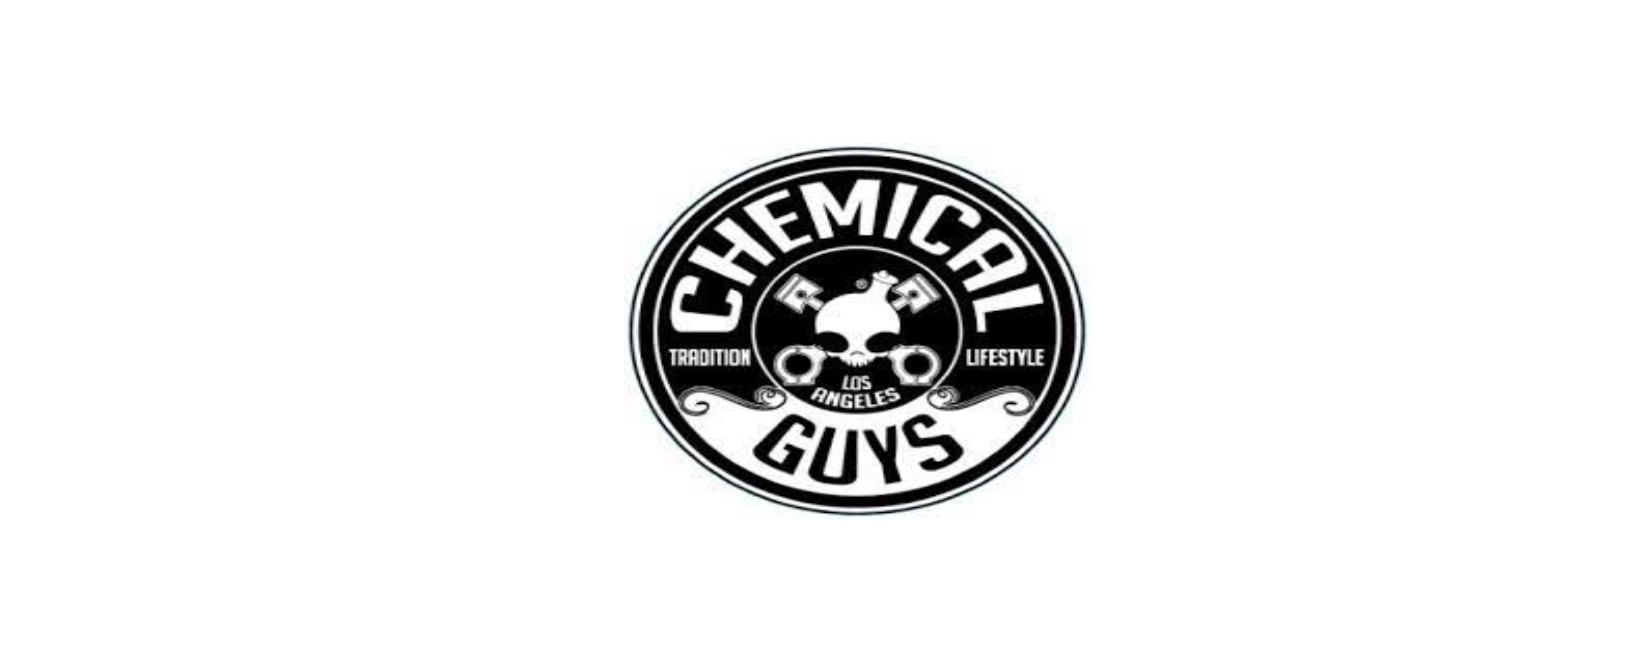 Chemical Guys Discount Code 2022